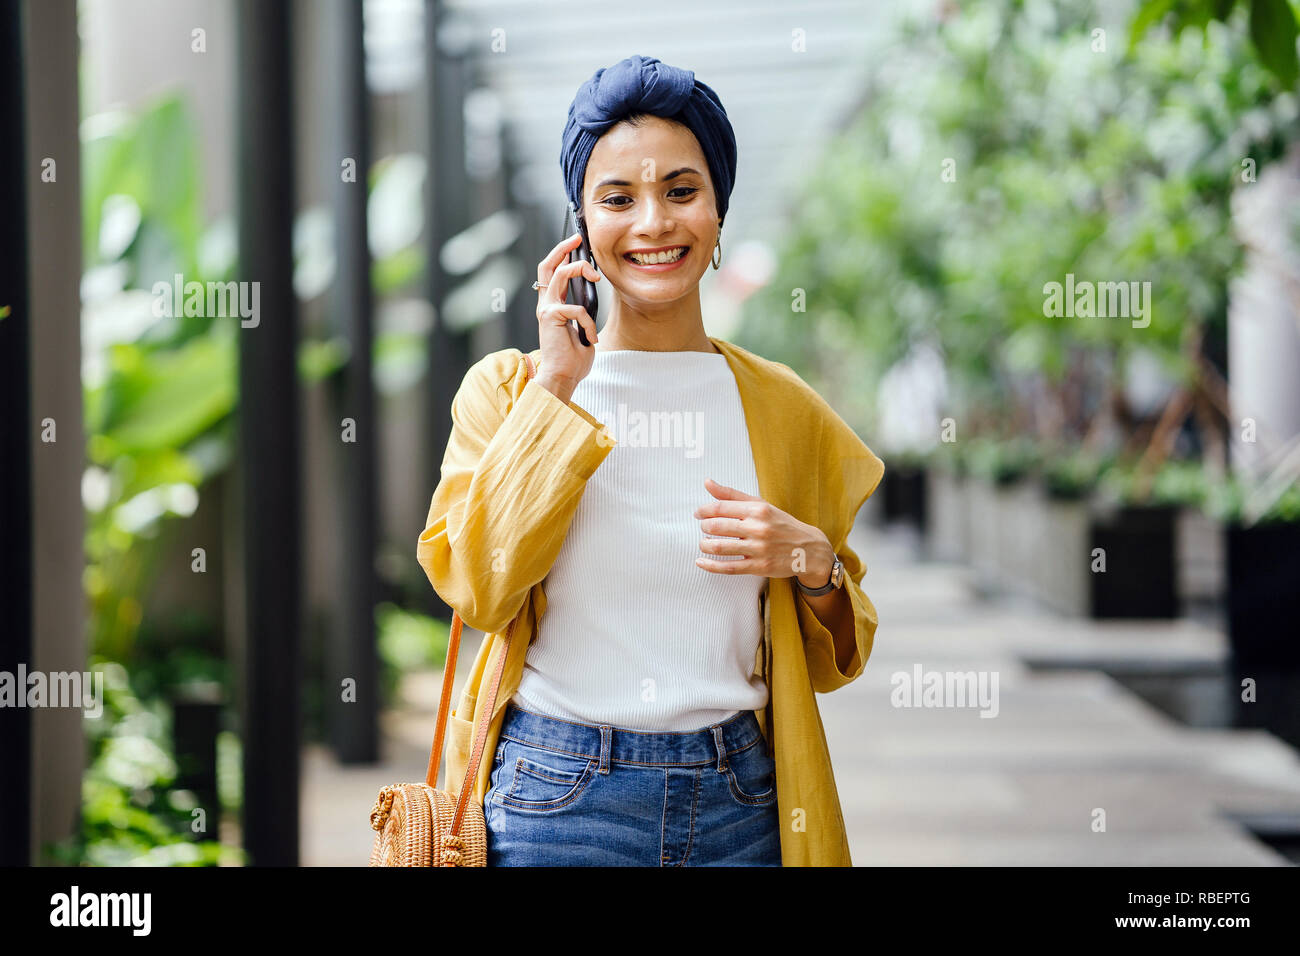 A young and beautiful Middle Eastern woman in a turban hijab is smiling as she talks on her smartphone on the street during the day. Stock Photo